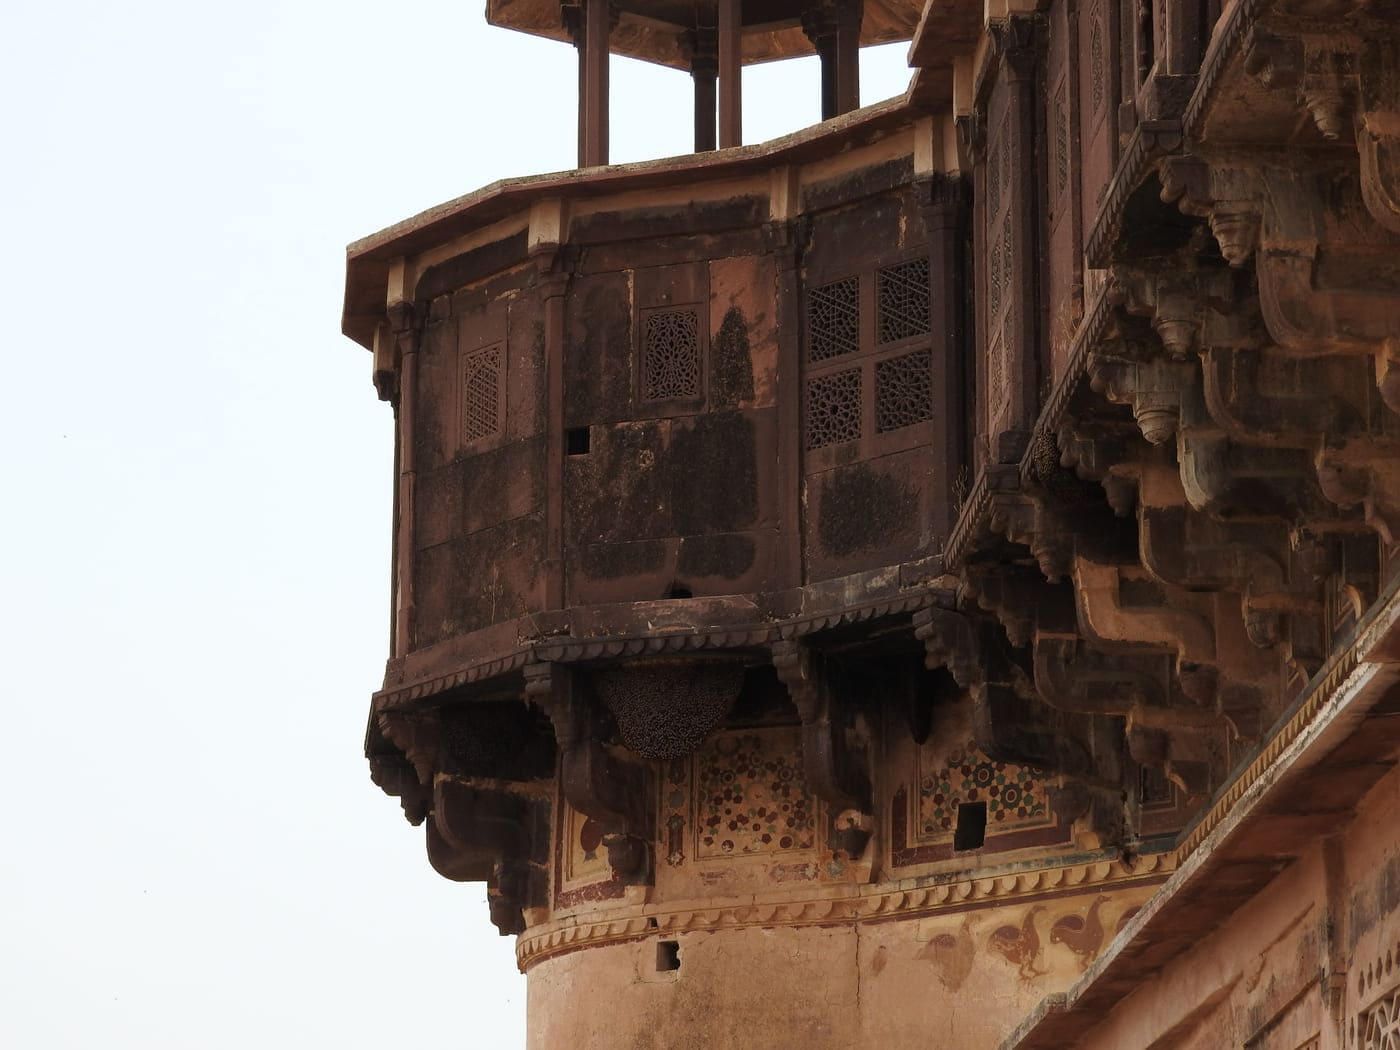 The now discoloured windows and passageways of the Jahangir Palace combine the sandstone of traditionally Hindu rulers of India with the Arabesque engraving style of the Mughals, Orchha 